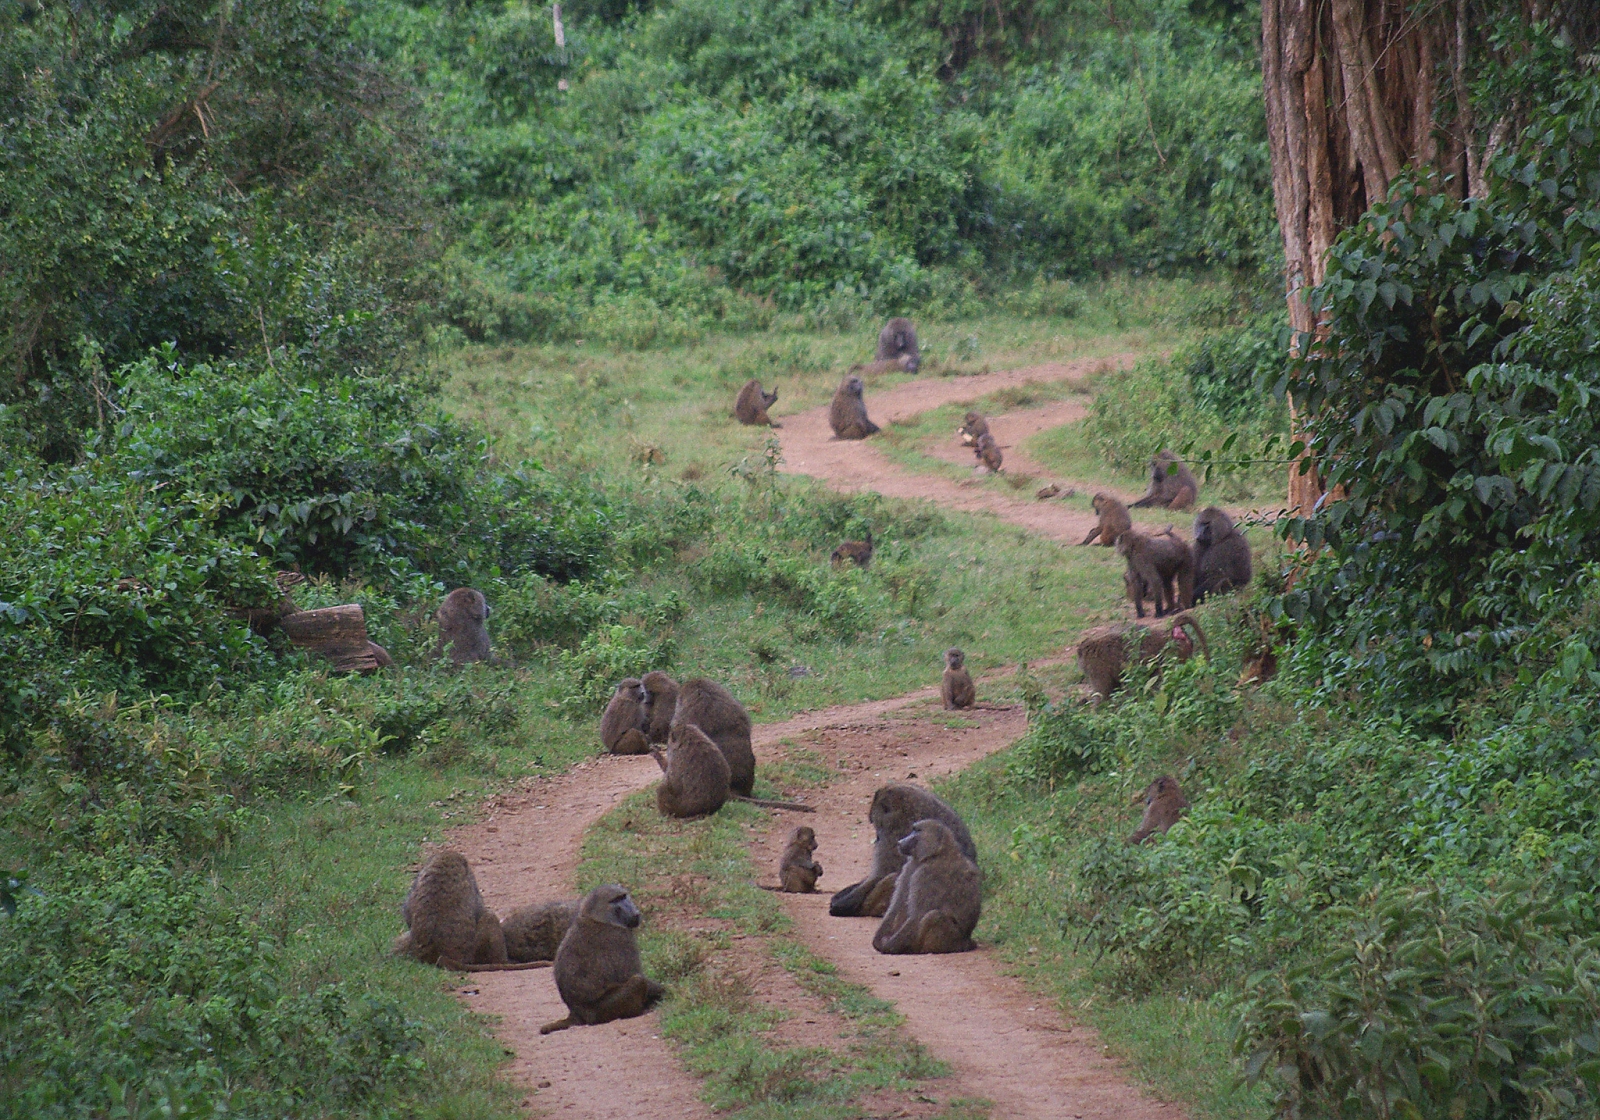 Baboons in Aberdare National Forest in Kenya